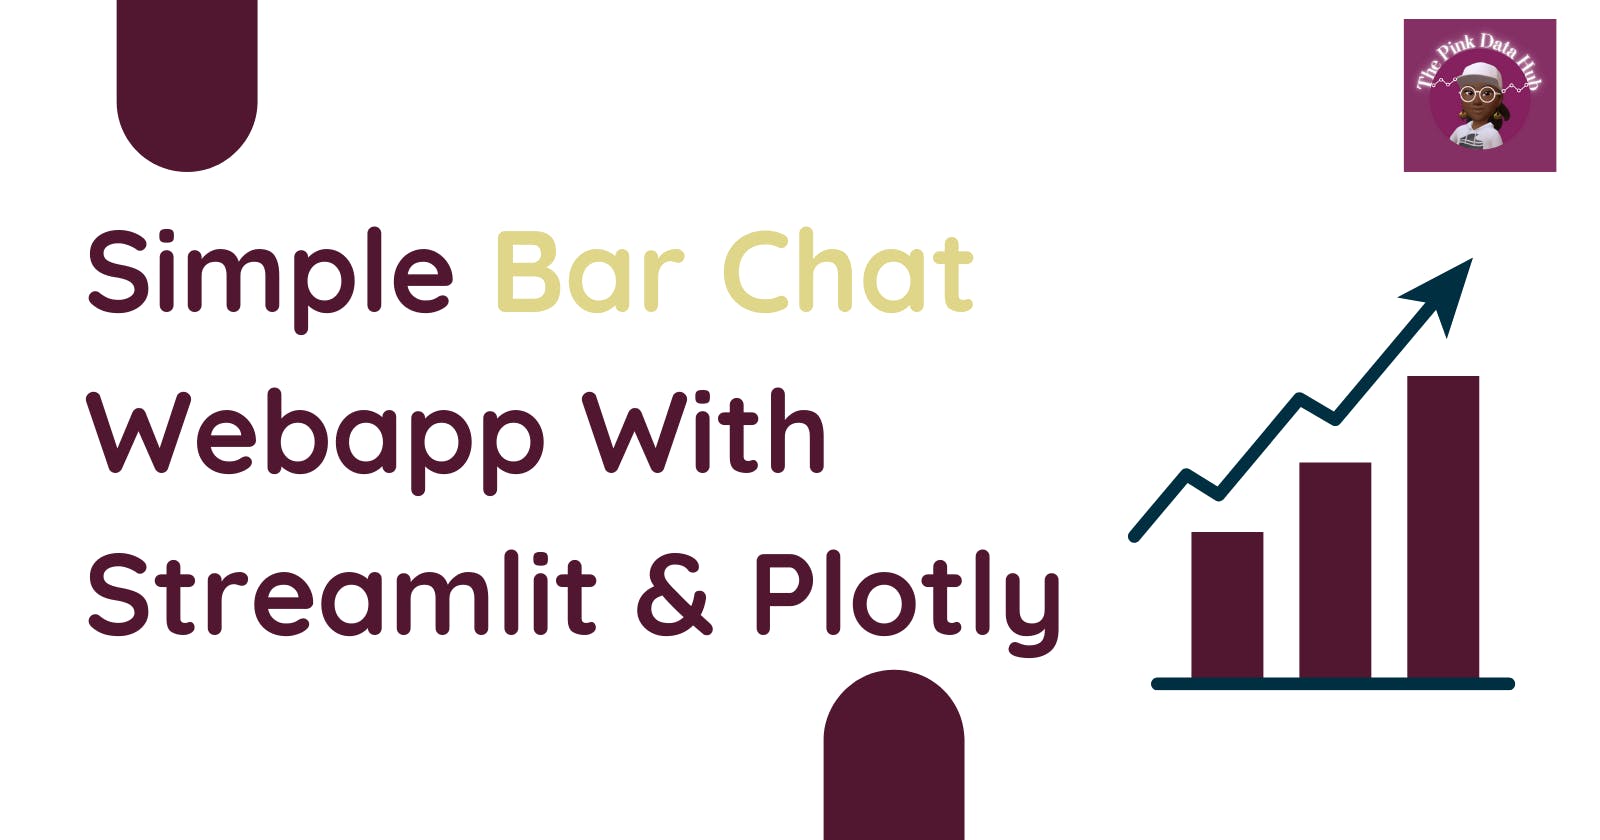 Bar Chat Webapp With Streamlit & Plotly